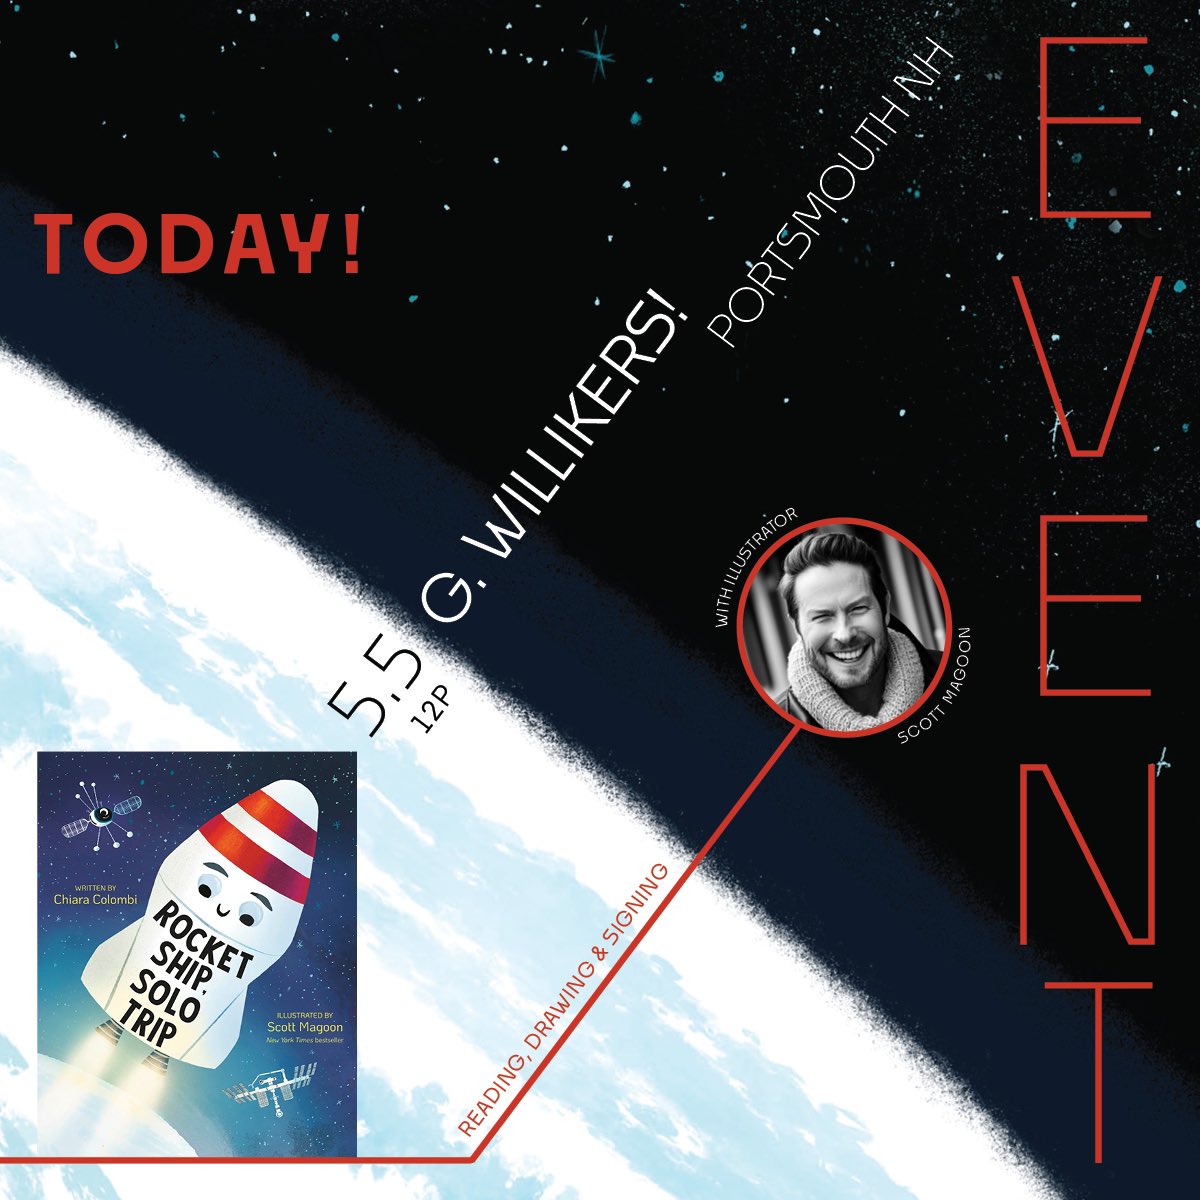 Bring the crew to @GWillikersNH today— I’ll be part of Children’s Day event, meeting young readers, parents to read & sign copies of my new book by @chiarabcolombi, ROCKET SHIP, SOLO TRIP & more. Be sure to get your special ROCKET mission sticker! 12-4. Hope to see you & thx!